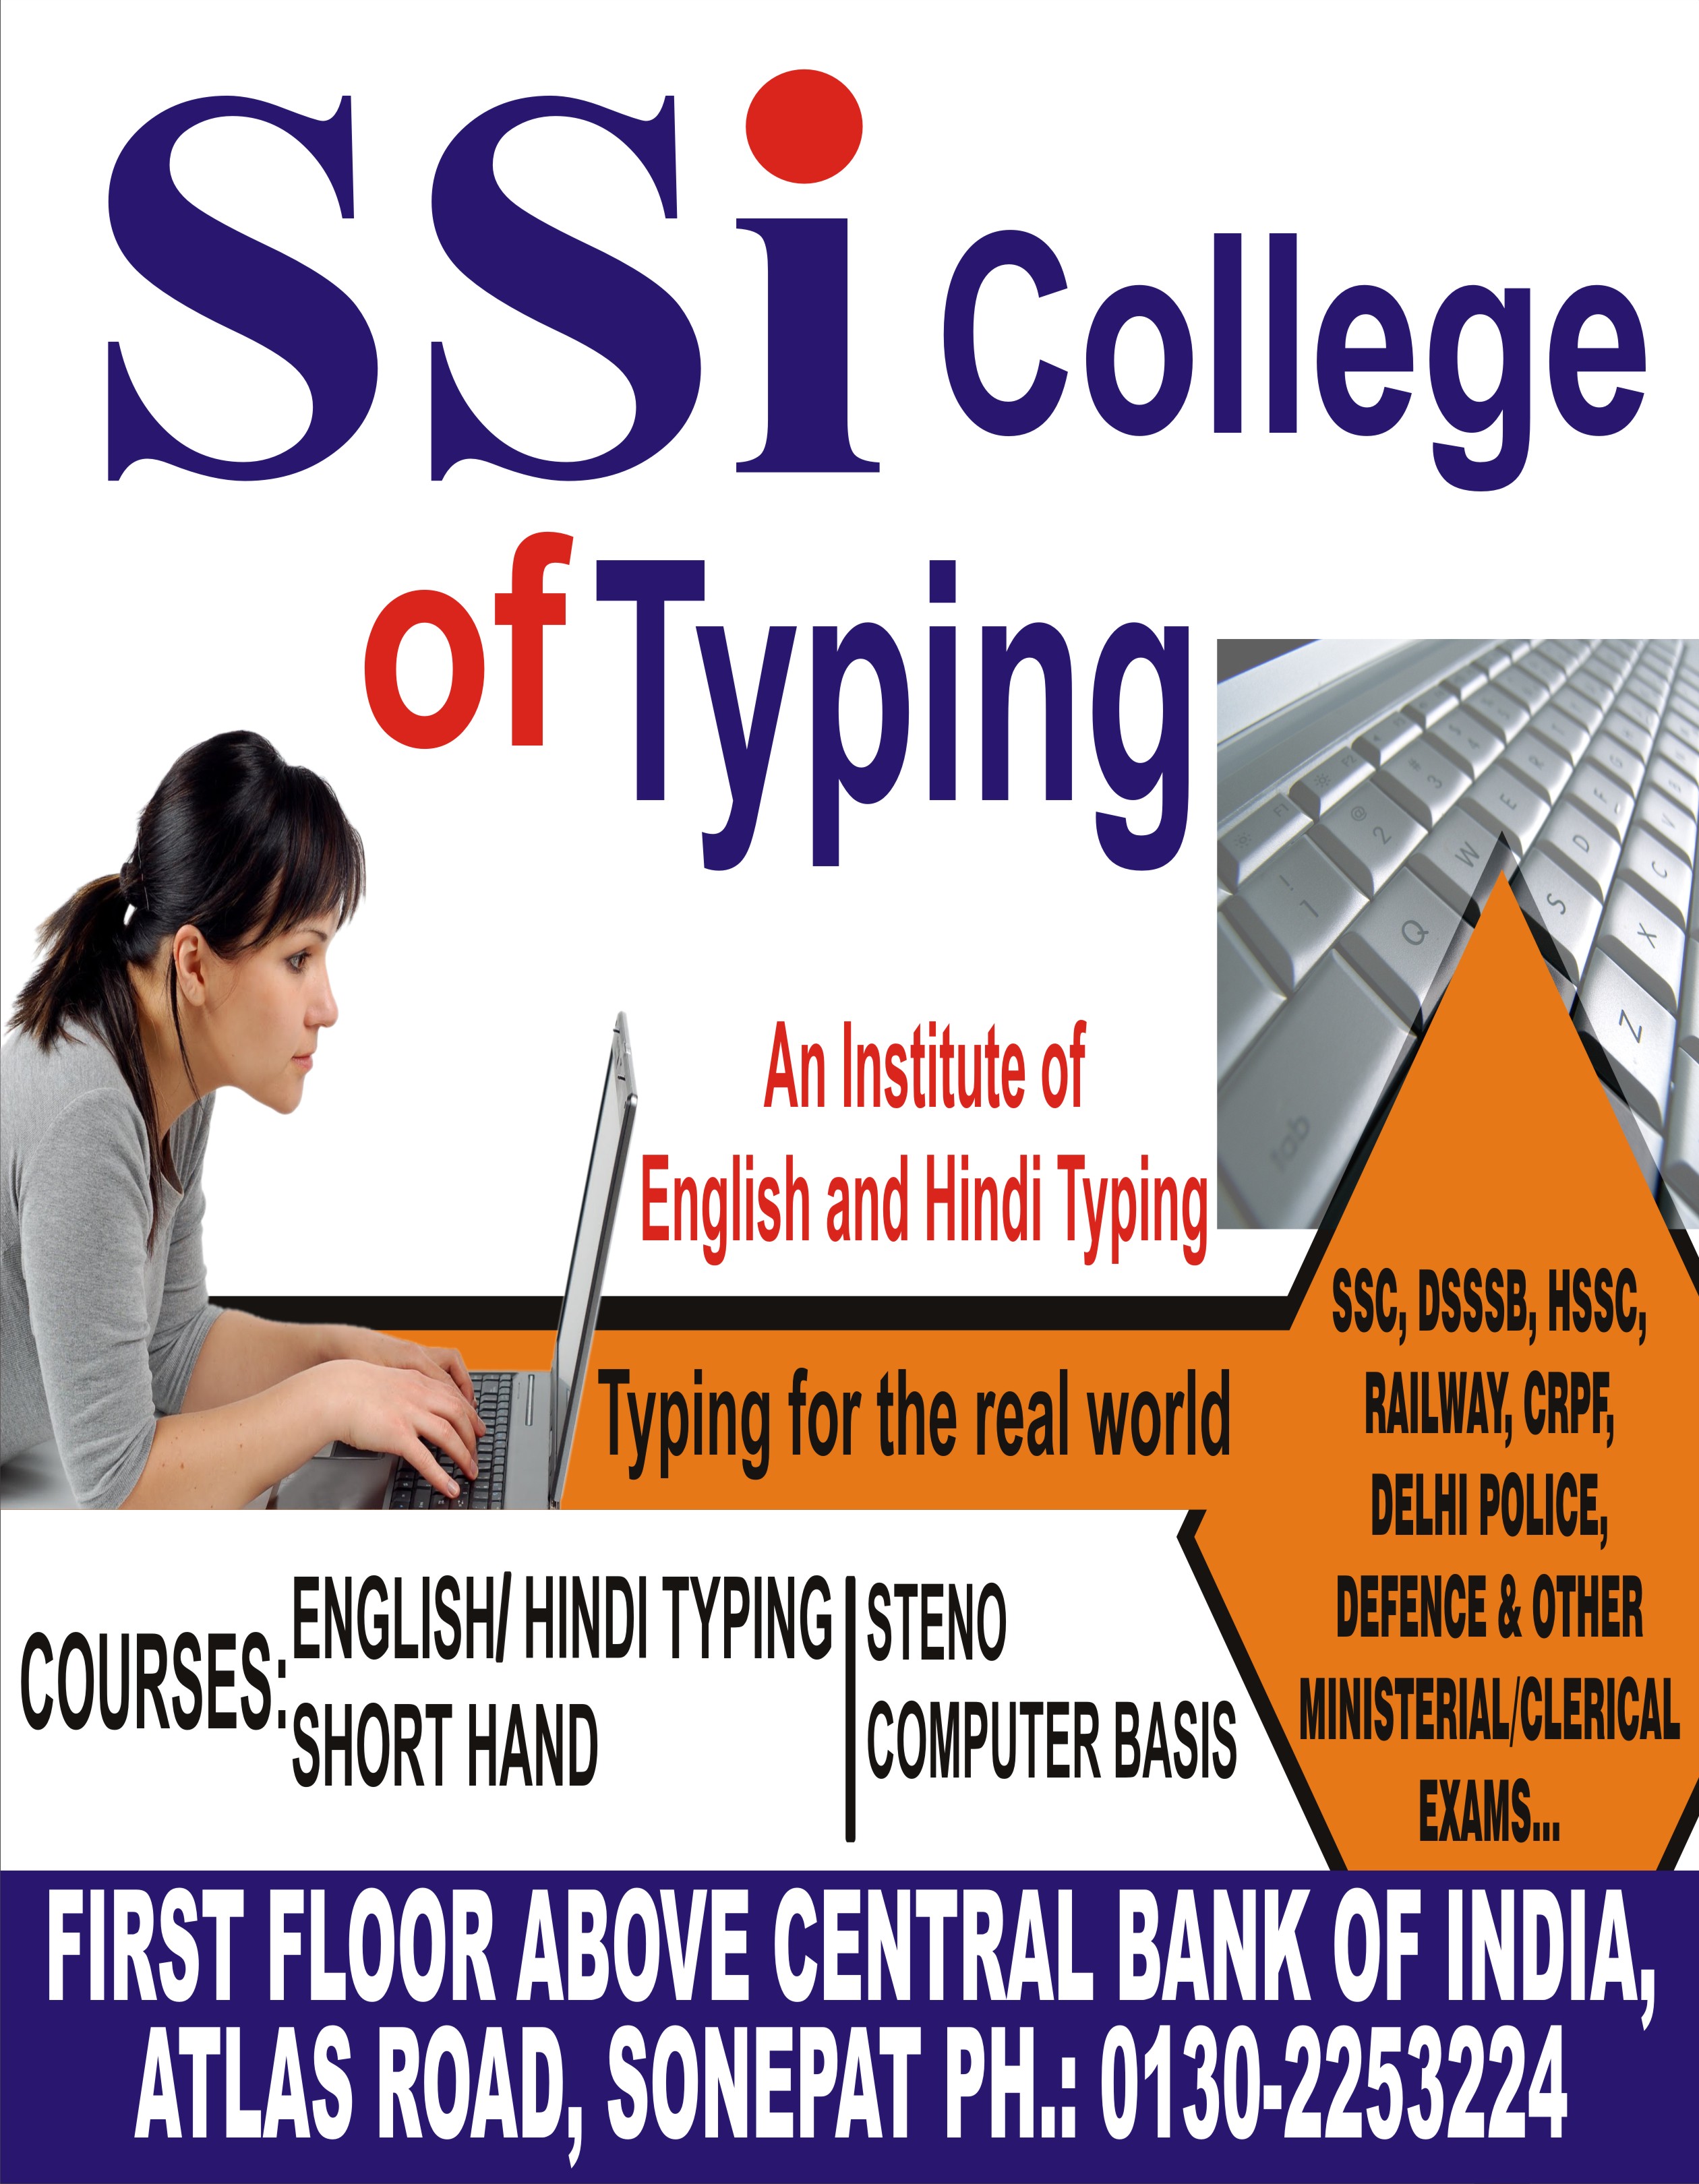 SSi College of Typing